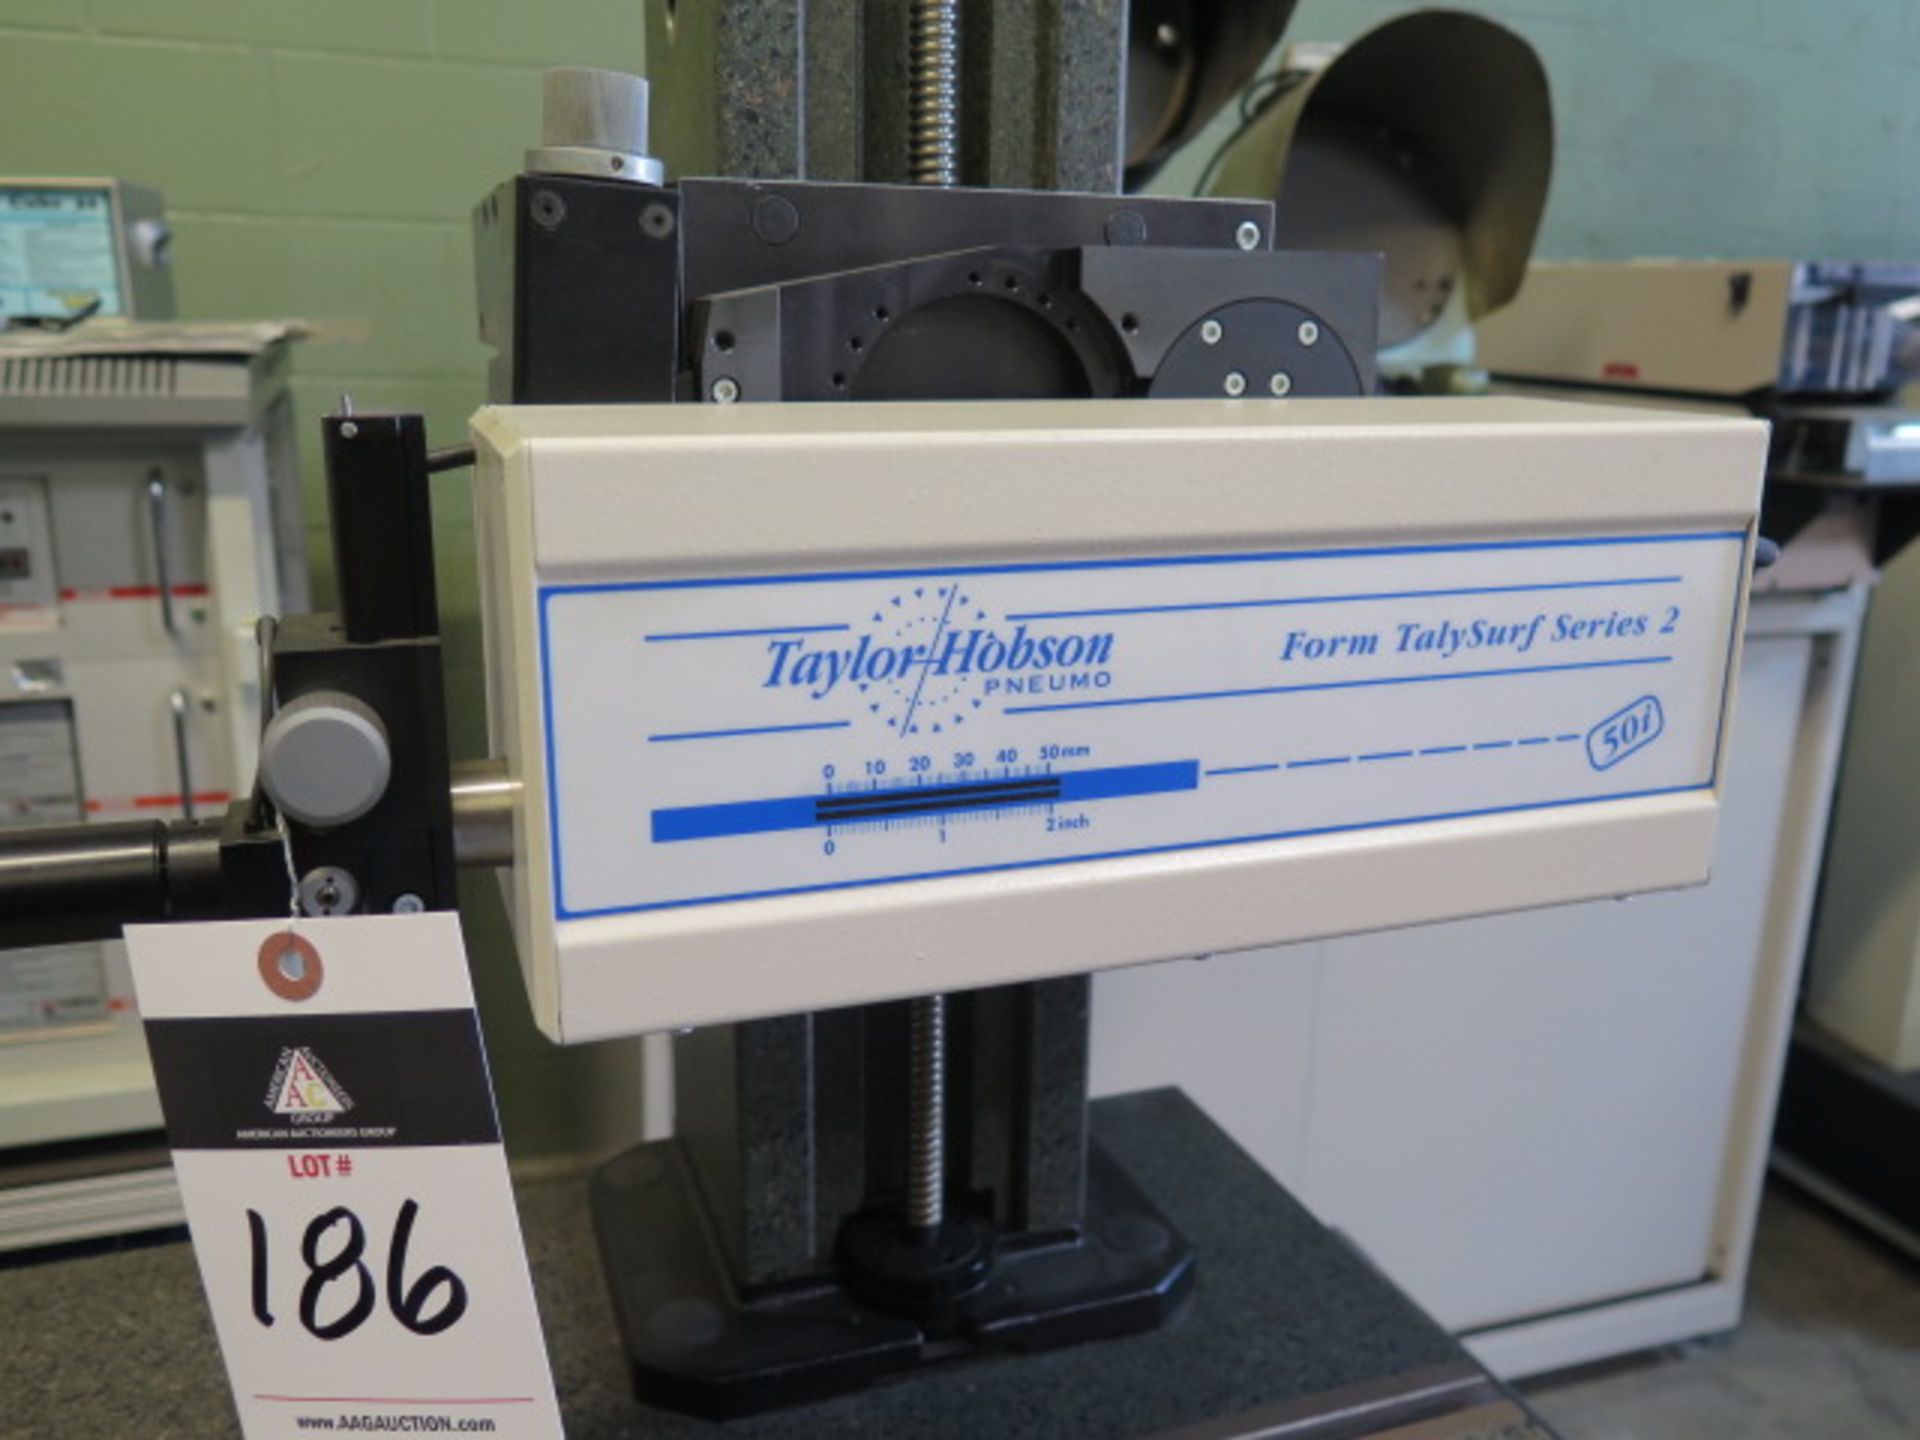 Taylor-Hobson"TalySurf" Series 2 Surface Roughness Gage w/ Computer Controls, 19 1/2" x 30" x 5" - Image 4 of 8